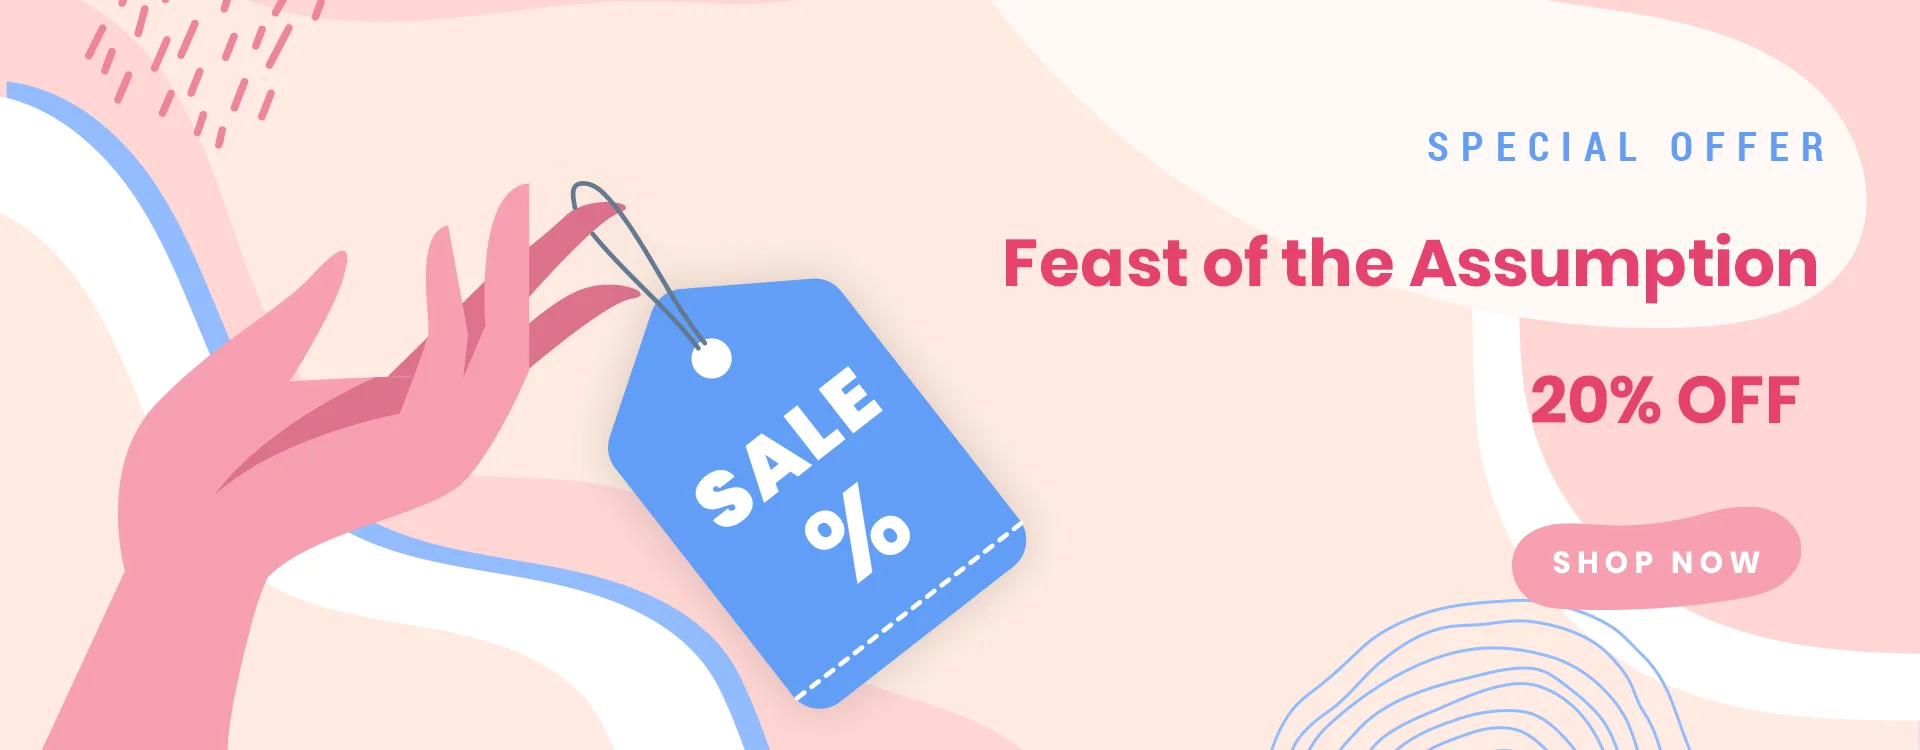 ASSUMPTION DAY - 20% off all products on PrestaHero!